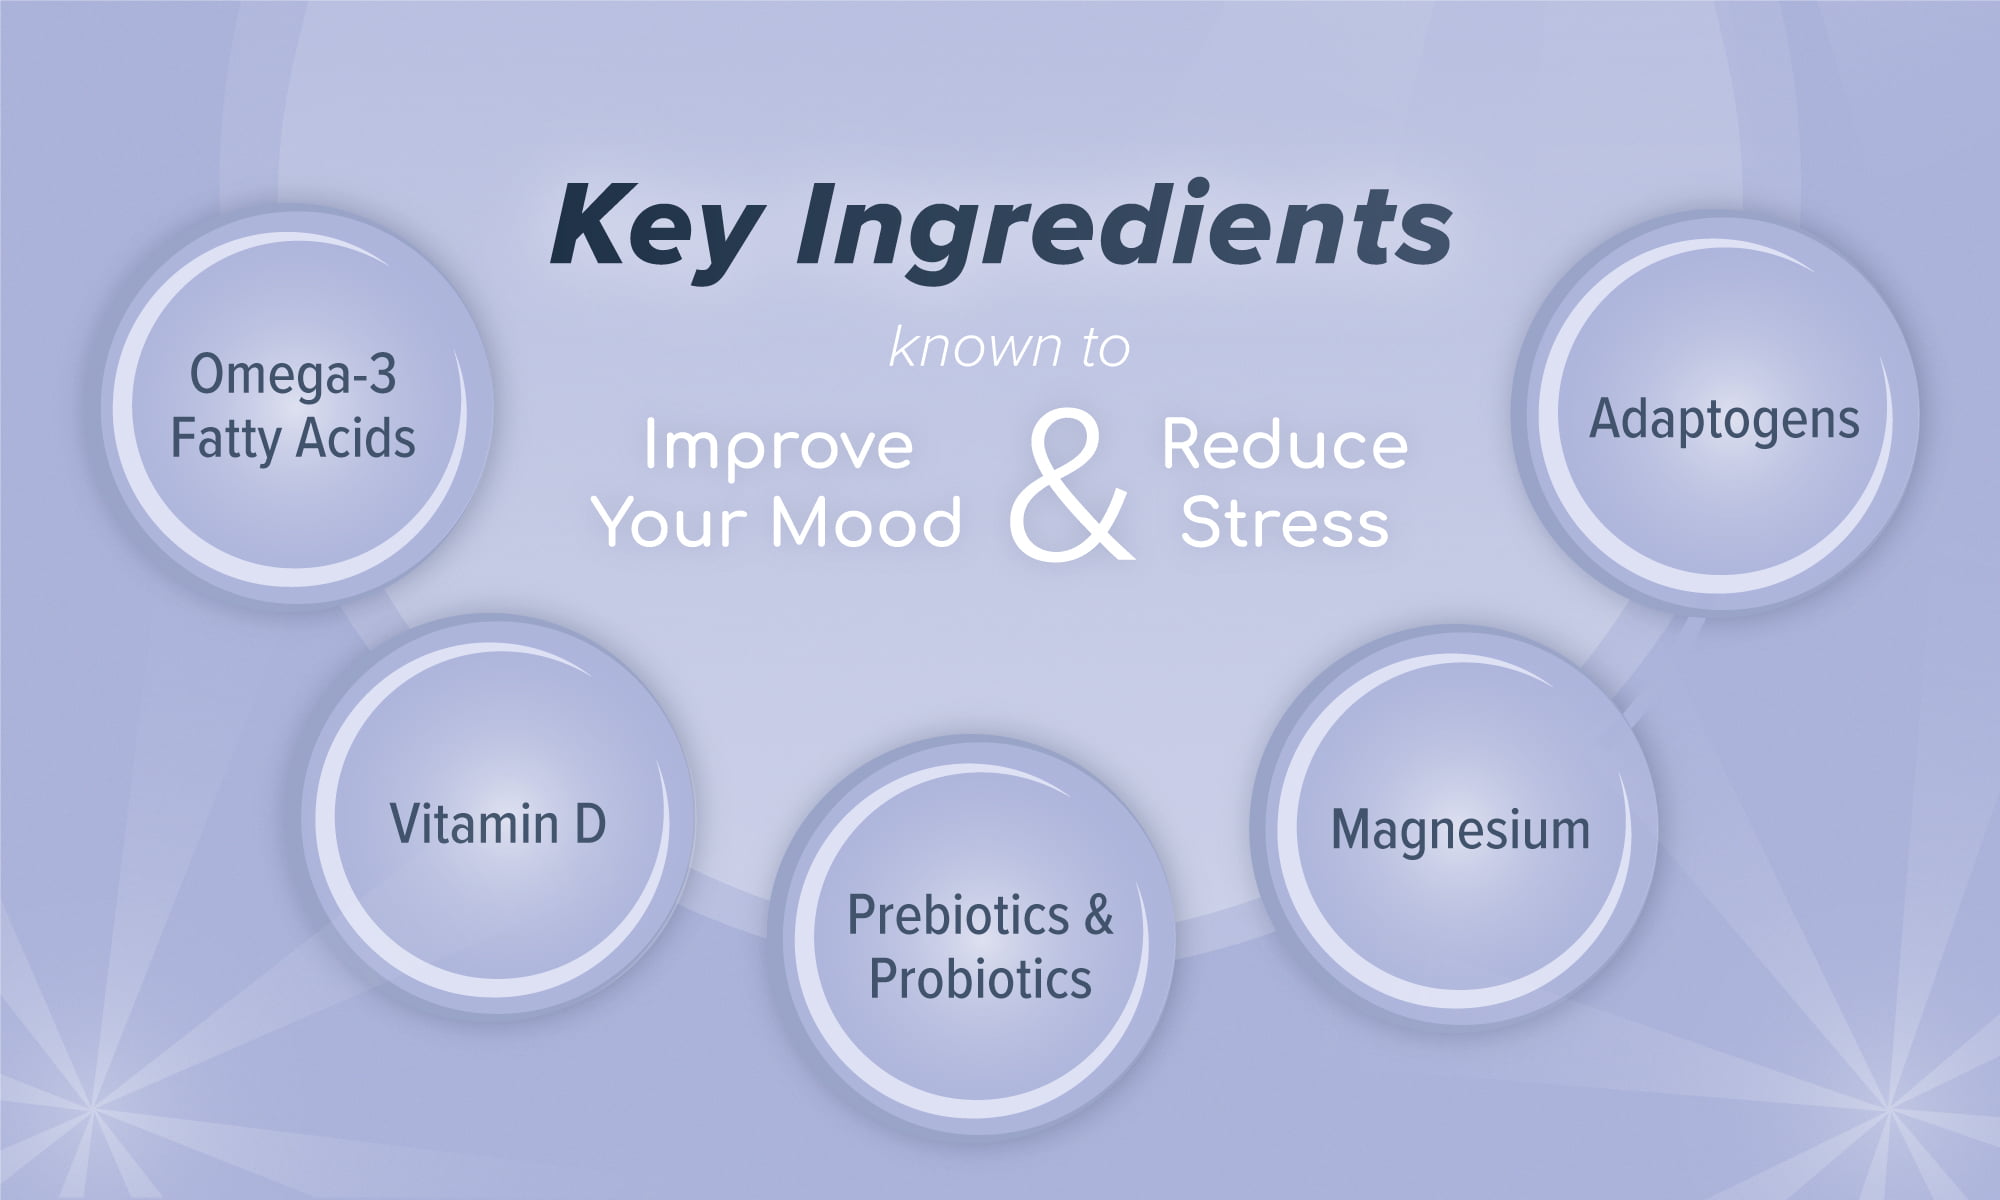 An infographic highlighting key ingredients known to improve your mood and reduce stress, including omega-3 fatty acids, vitamin D, prebiotics and probiotics, magnesium, and adaptogens.